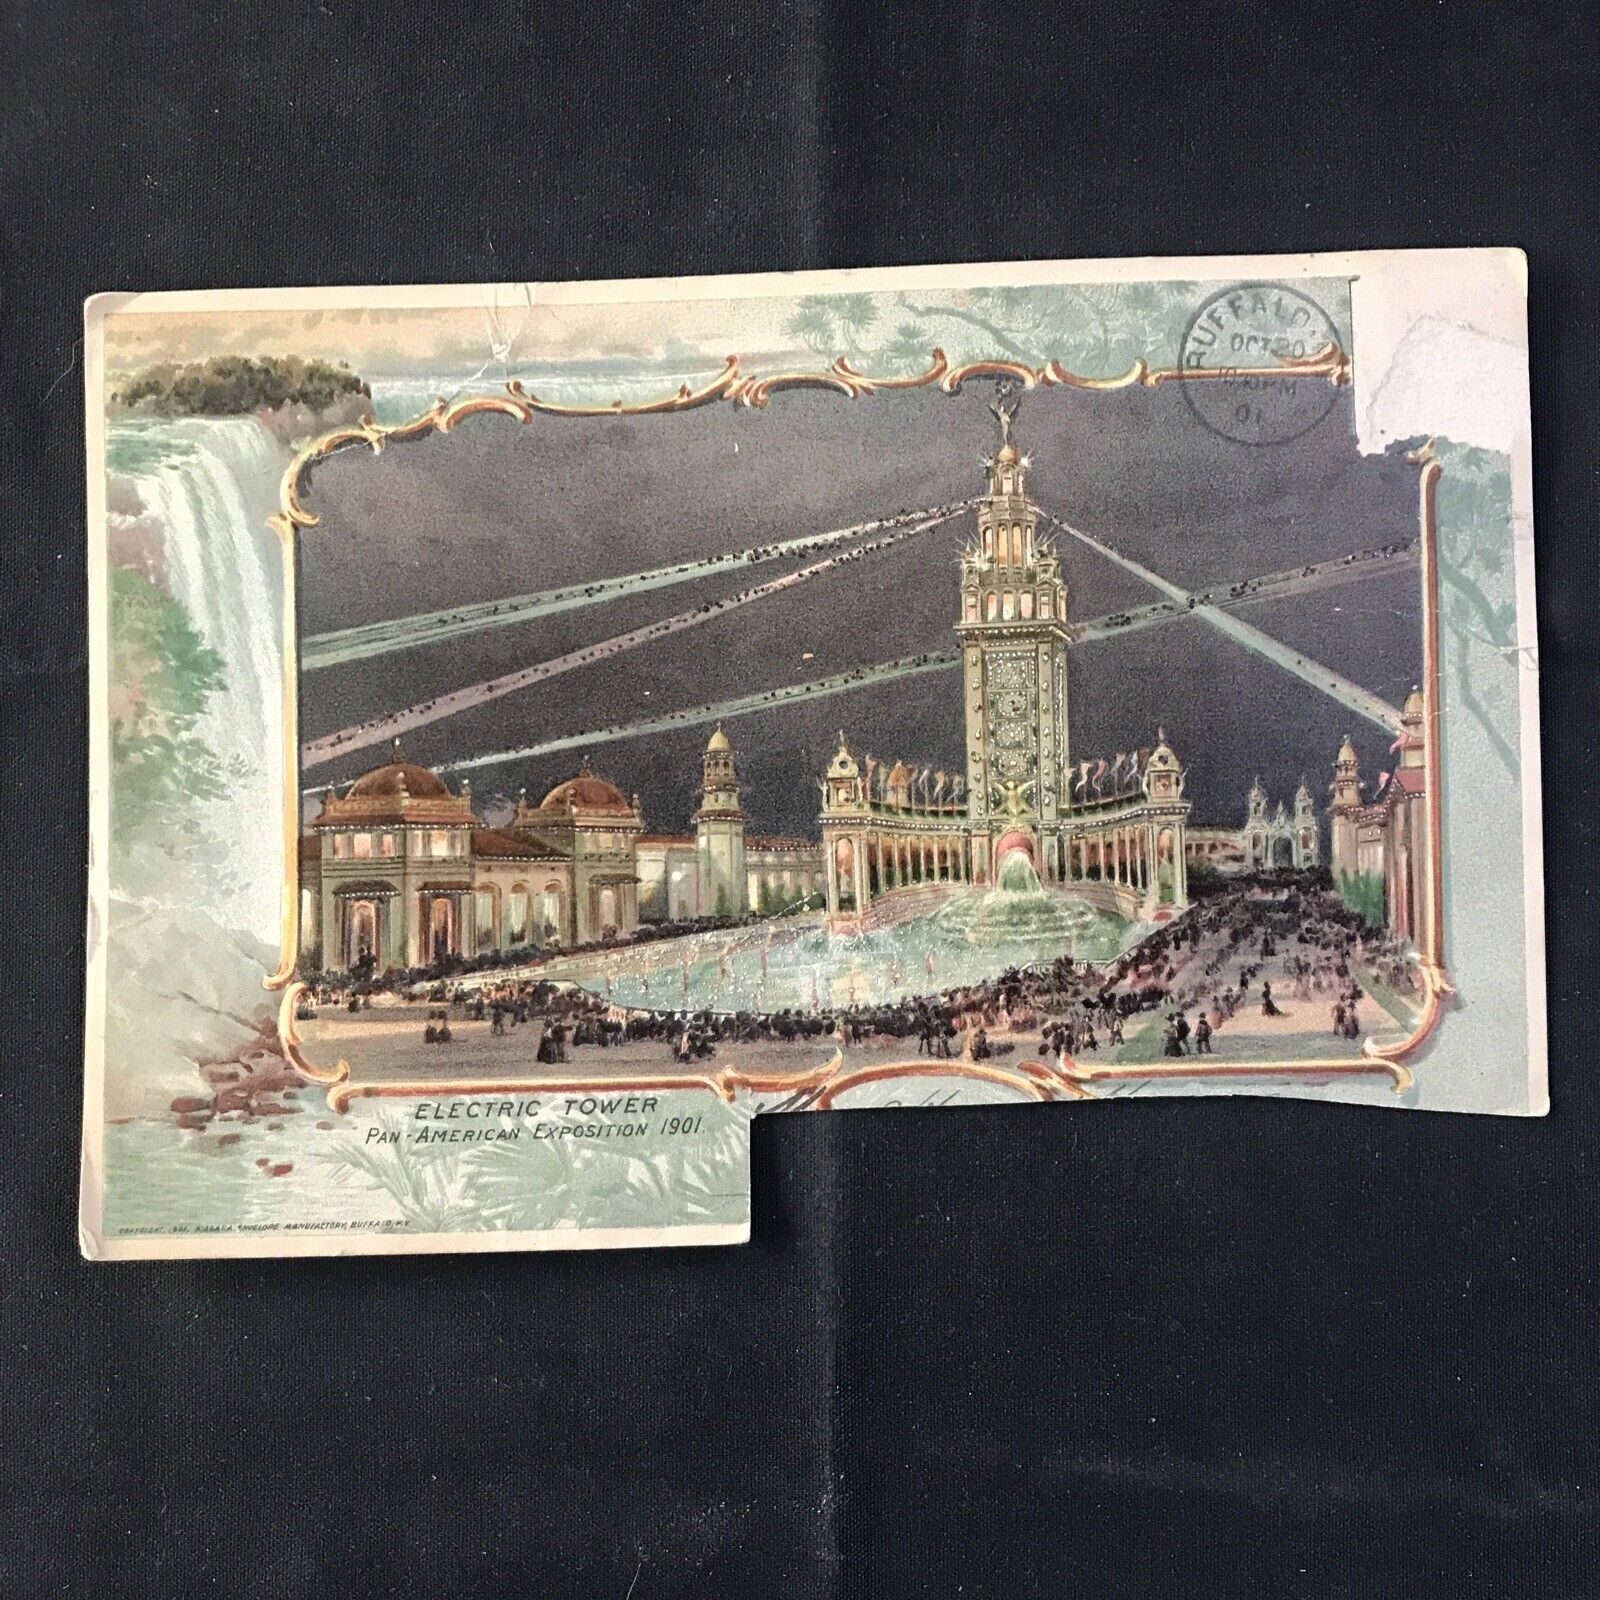 Pan American ￼ ￼ Exposition  ￼1901 Electric Tower Large Postcard with Glitter